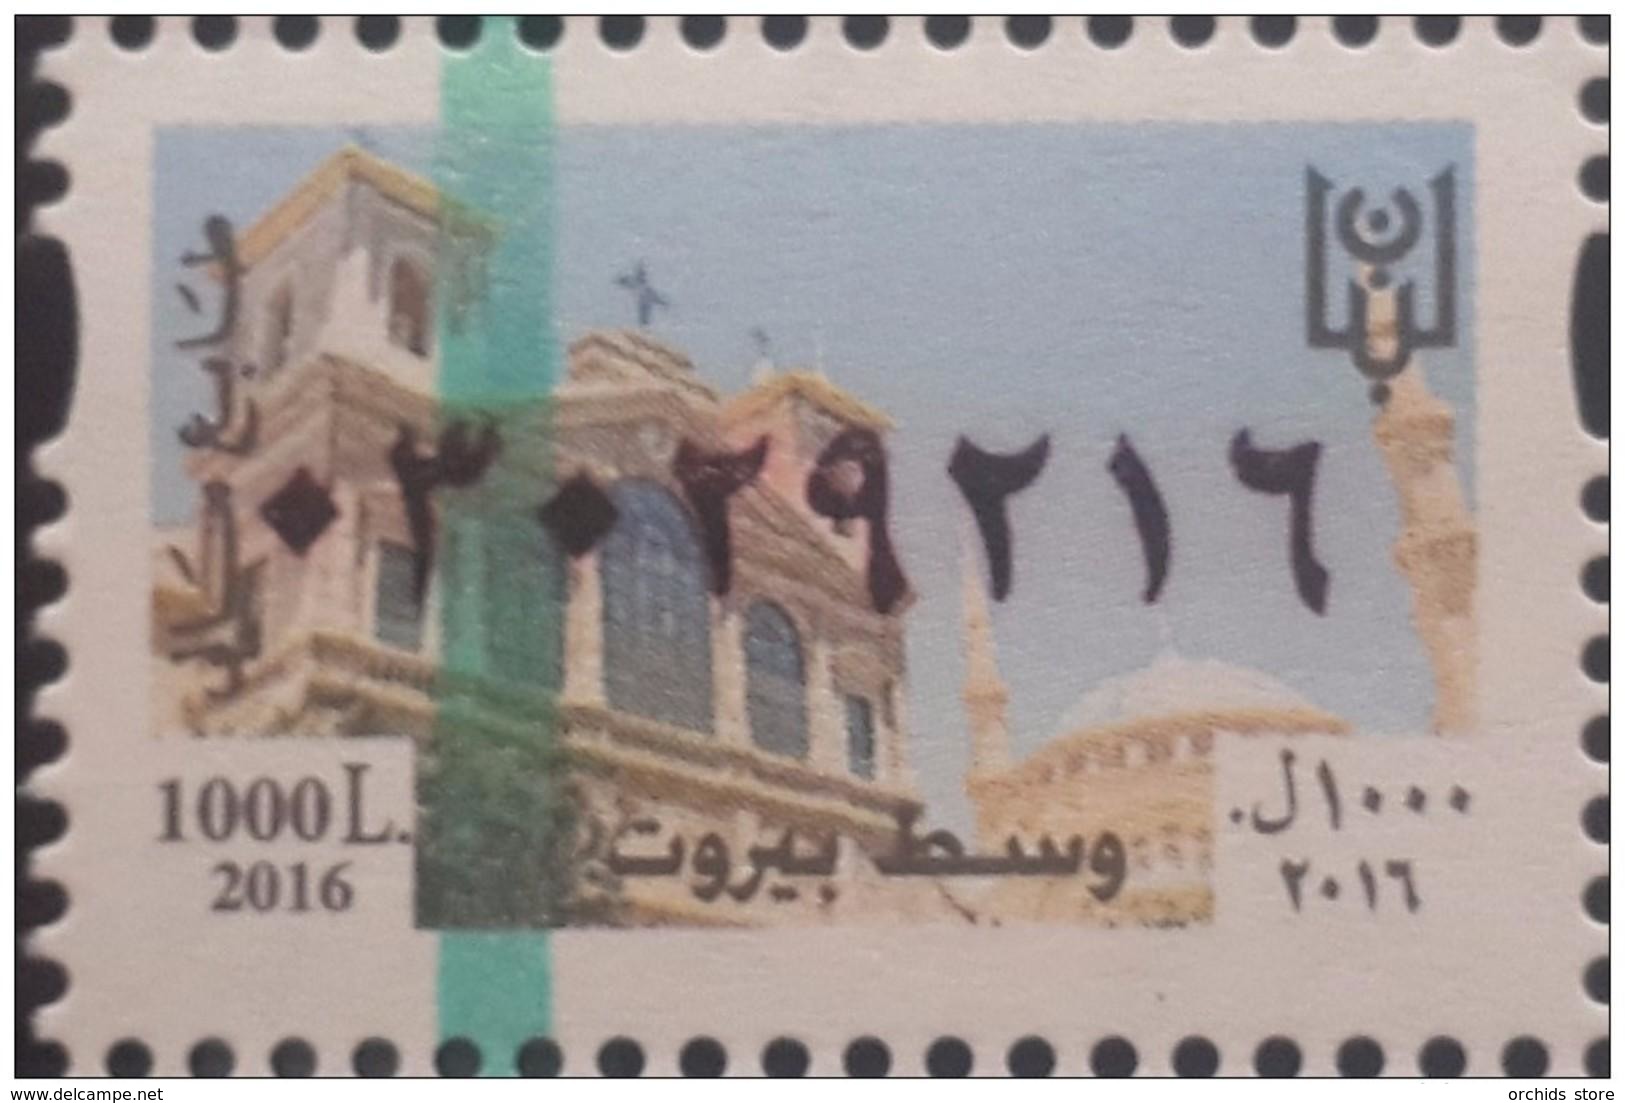 Lebanon 2016 NEW MNH Fiscal Revenue Stamp - 1000L Beirut Center - St George Cathedral & Al Amine Mosque - Lebanon